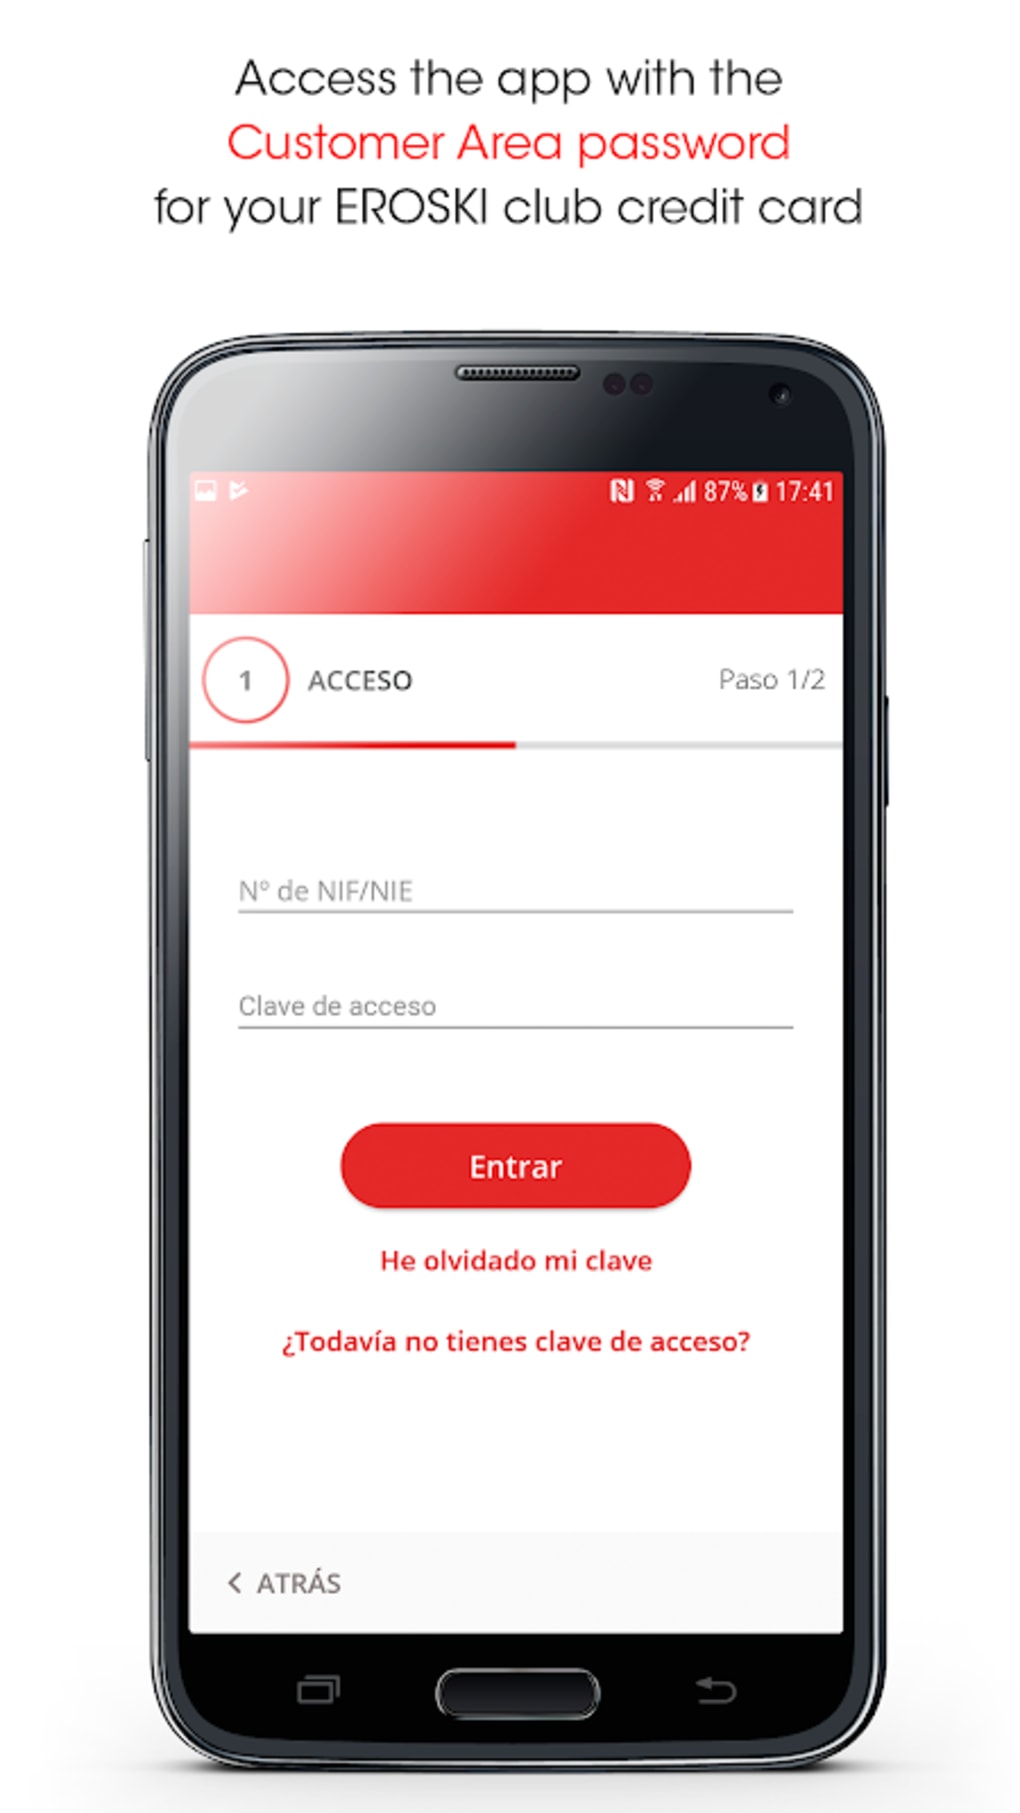 Android Apps by Santander Consumer Bank AS on Google Play